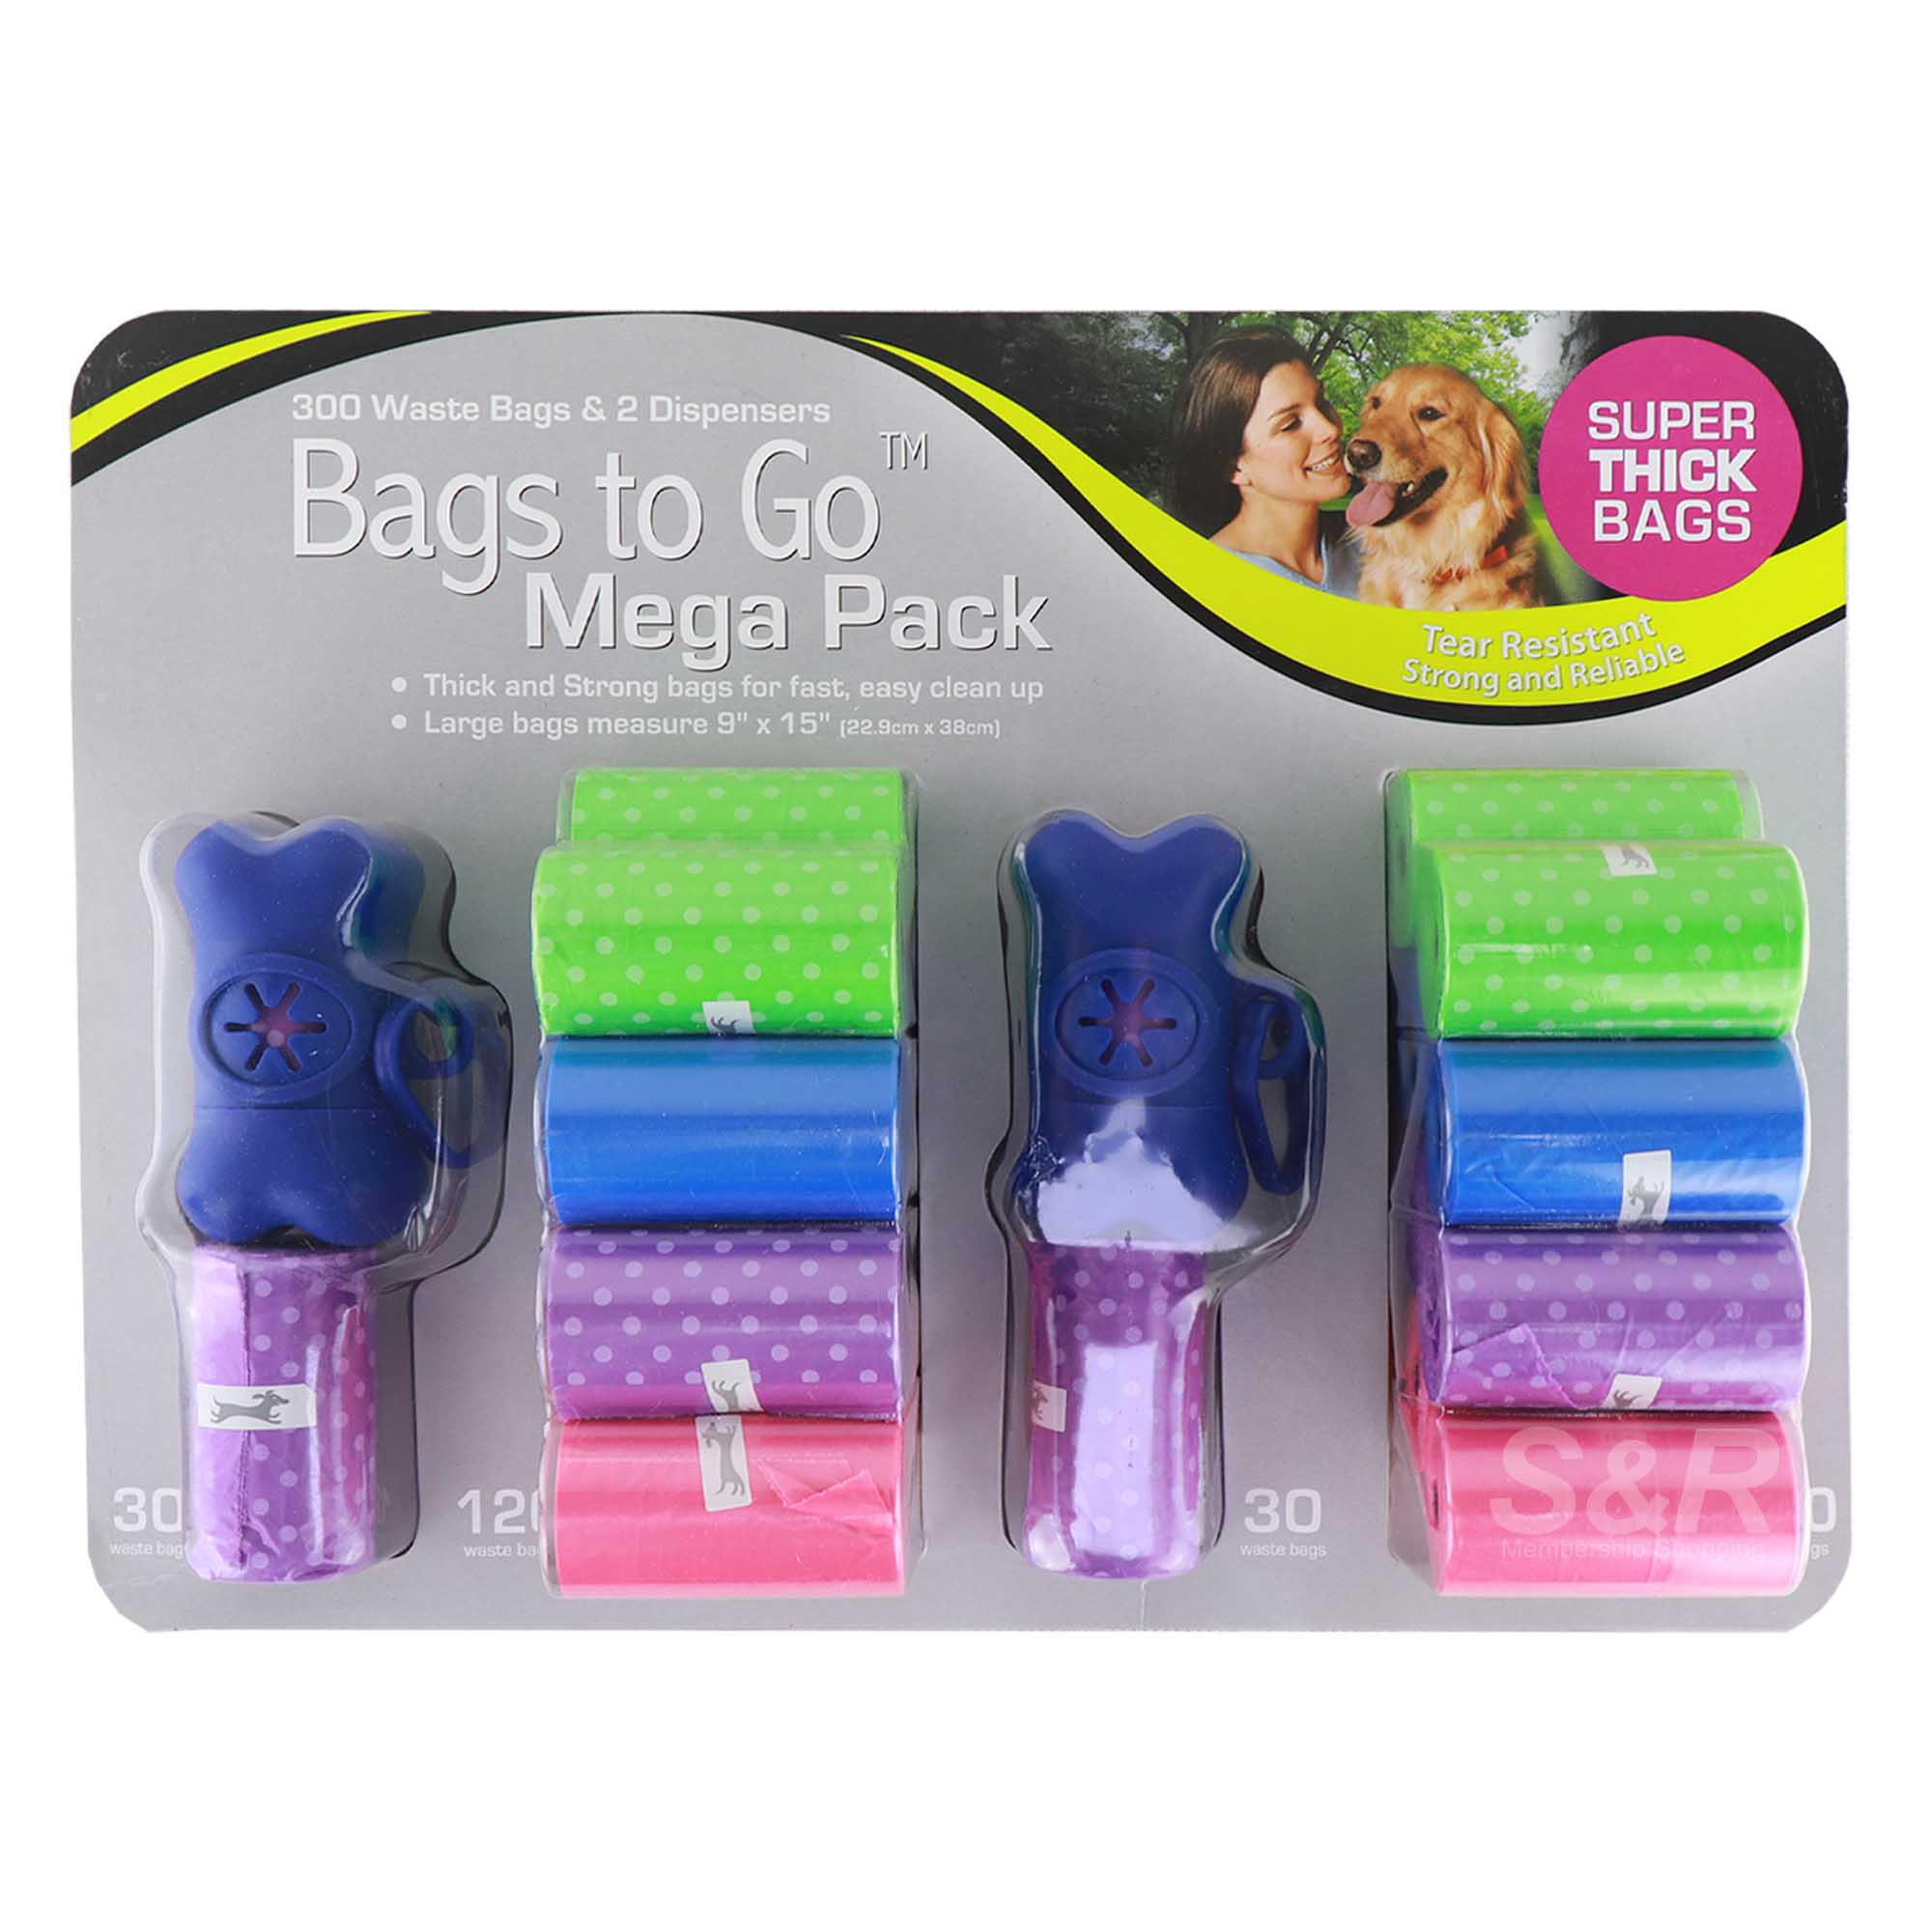 Bags to Go Mega Pack Waste Bags and Dispensers 300pcs